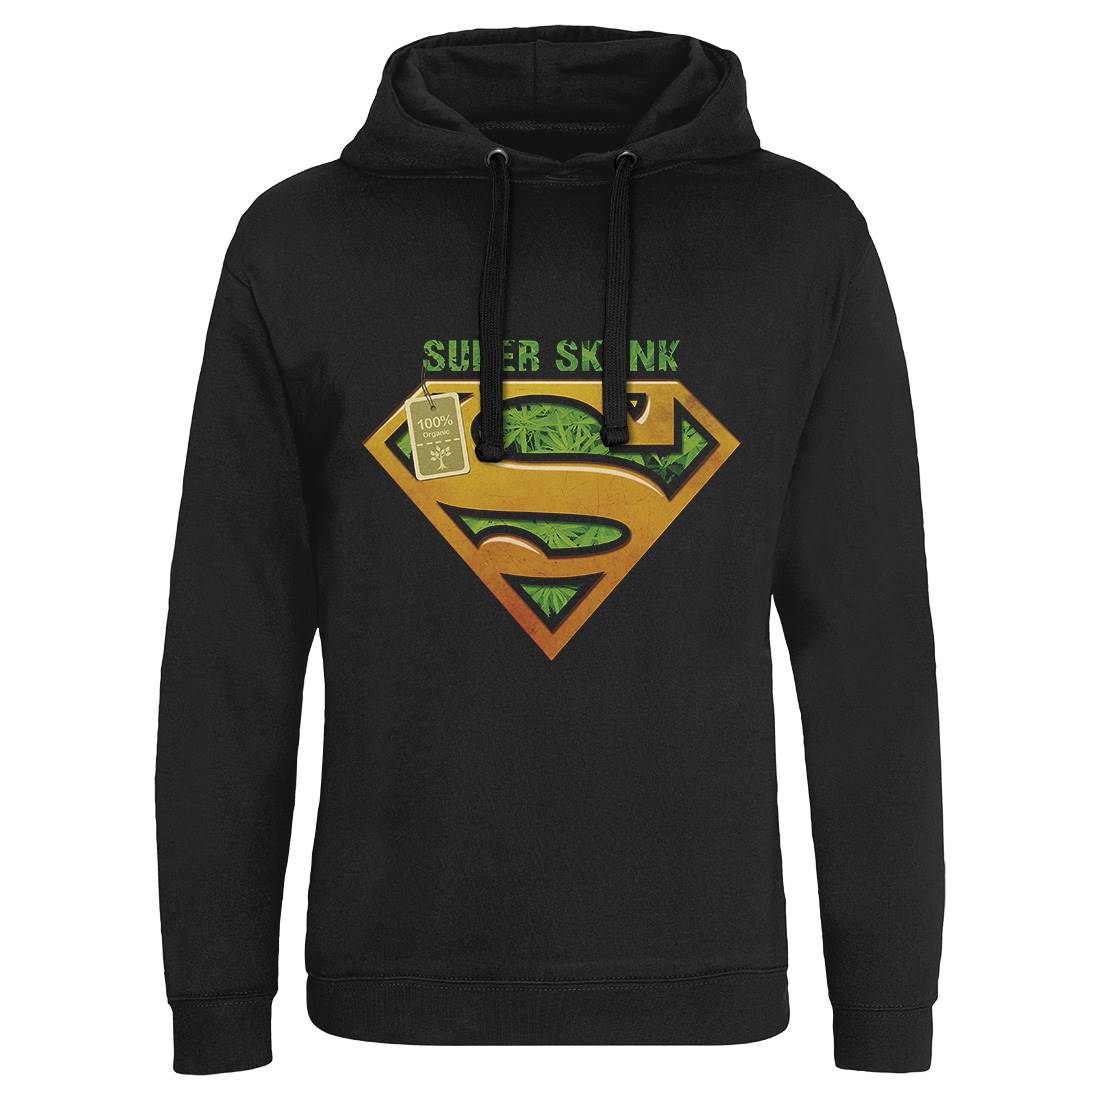 Super Organic Hero Mens Hoodie Without Pocket Drugs A916